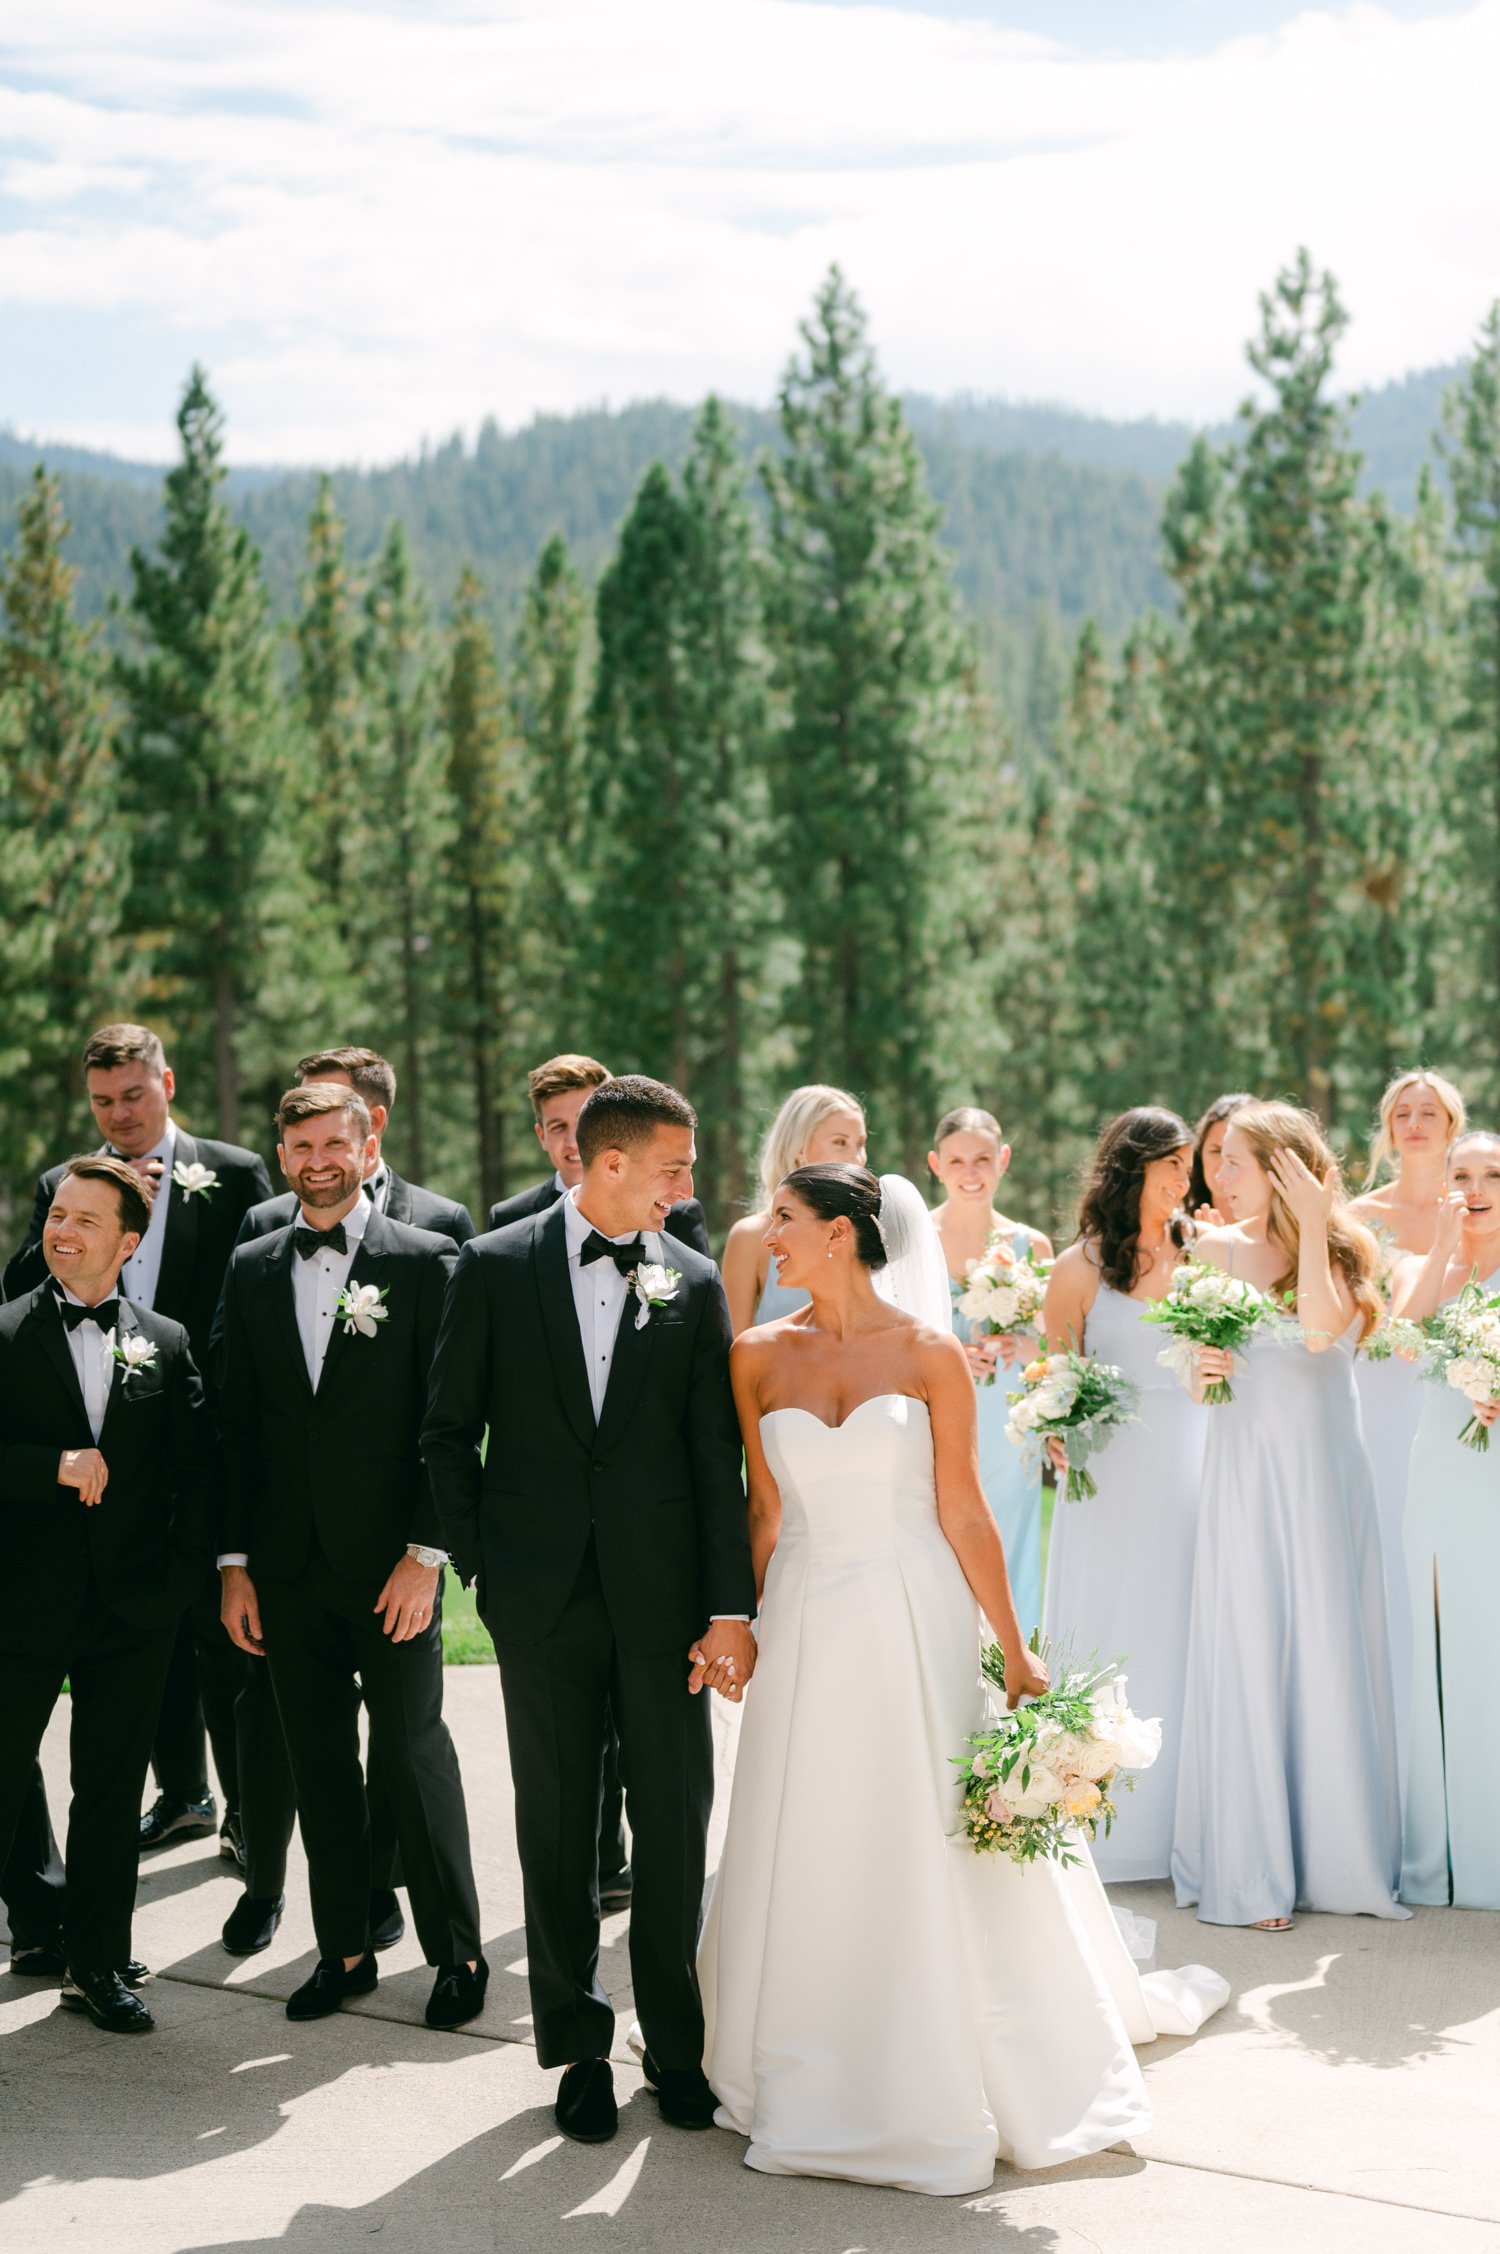 Martis Camp Wedding, photo of the happy couple with their wedding party.